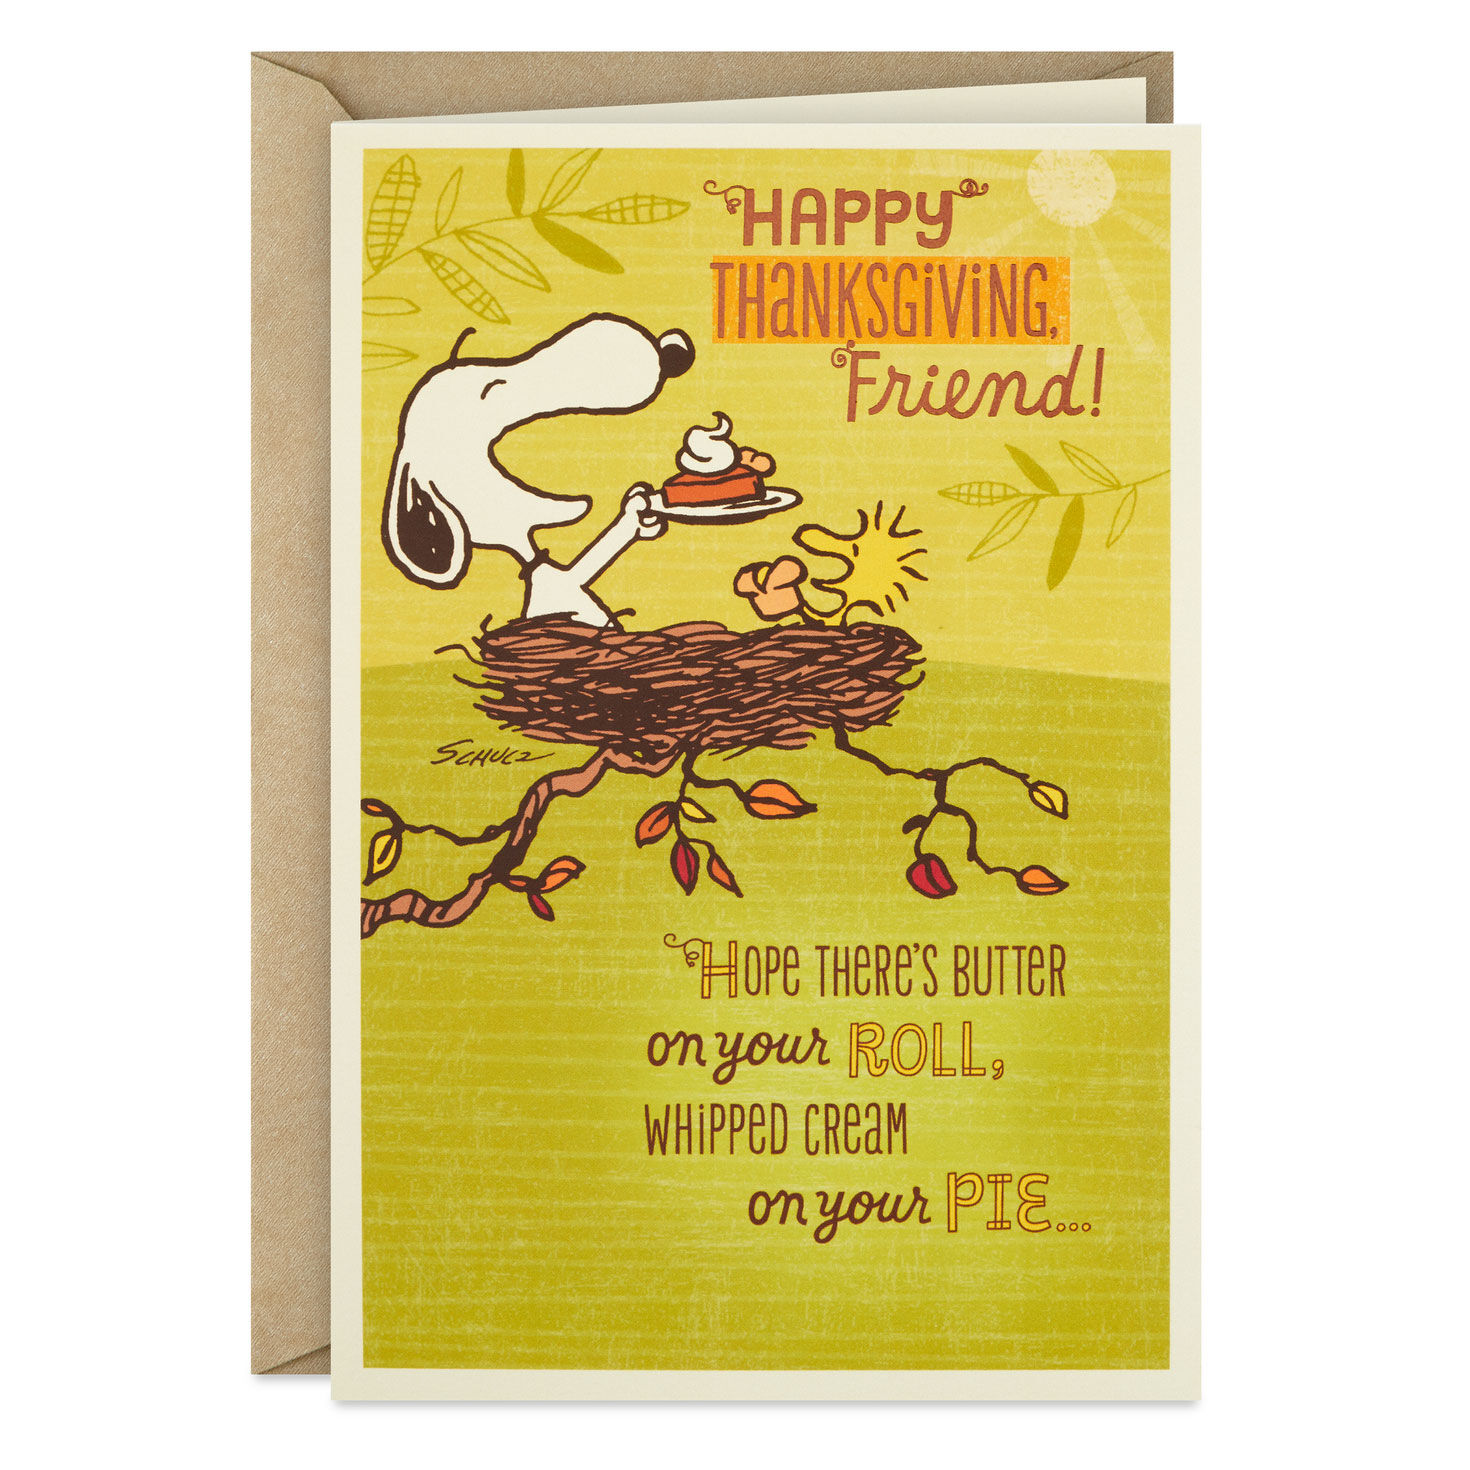 Peanuts® Snoopy and Woodstock Smile Thanksgiving Card for Friend for only USD 2.00 | Hallmark